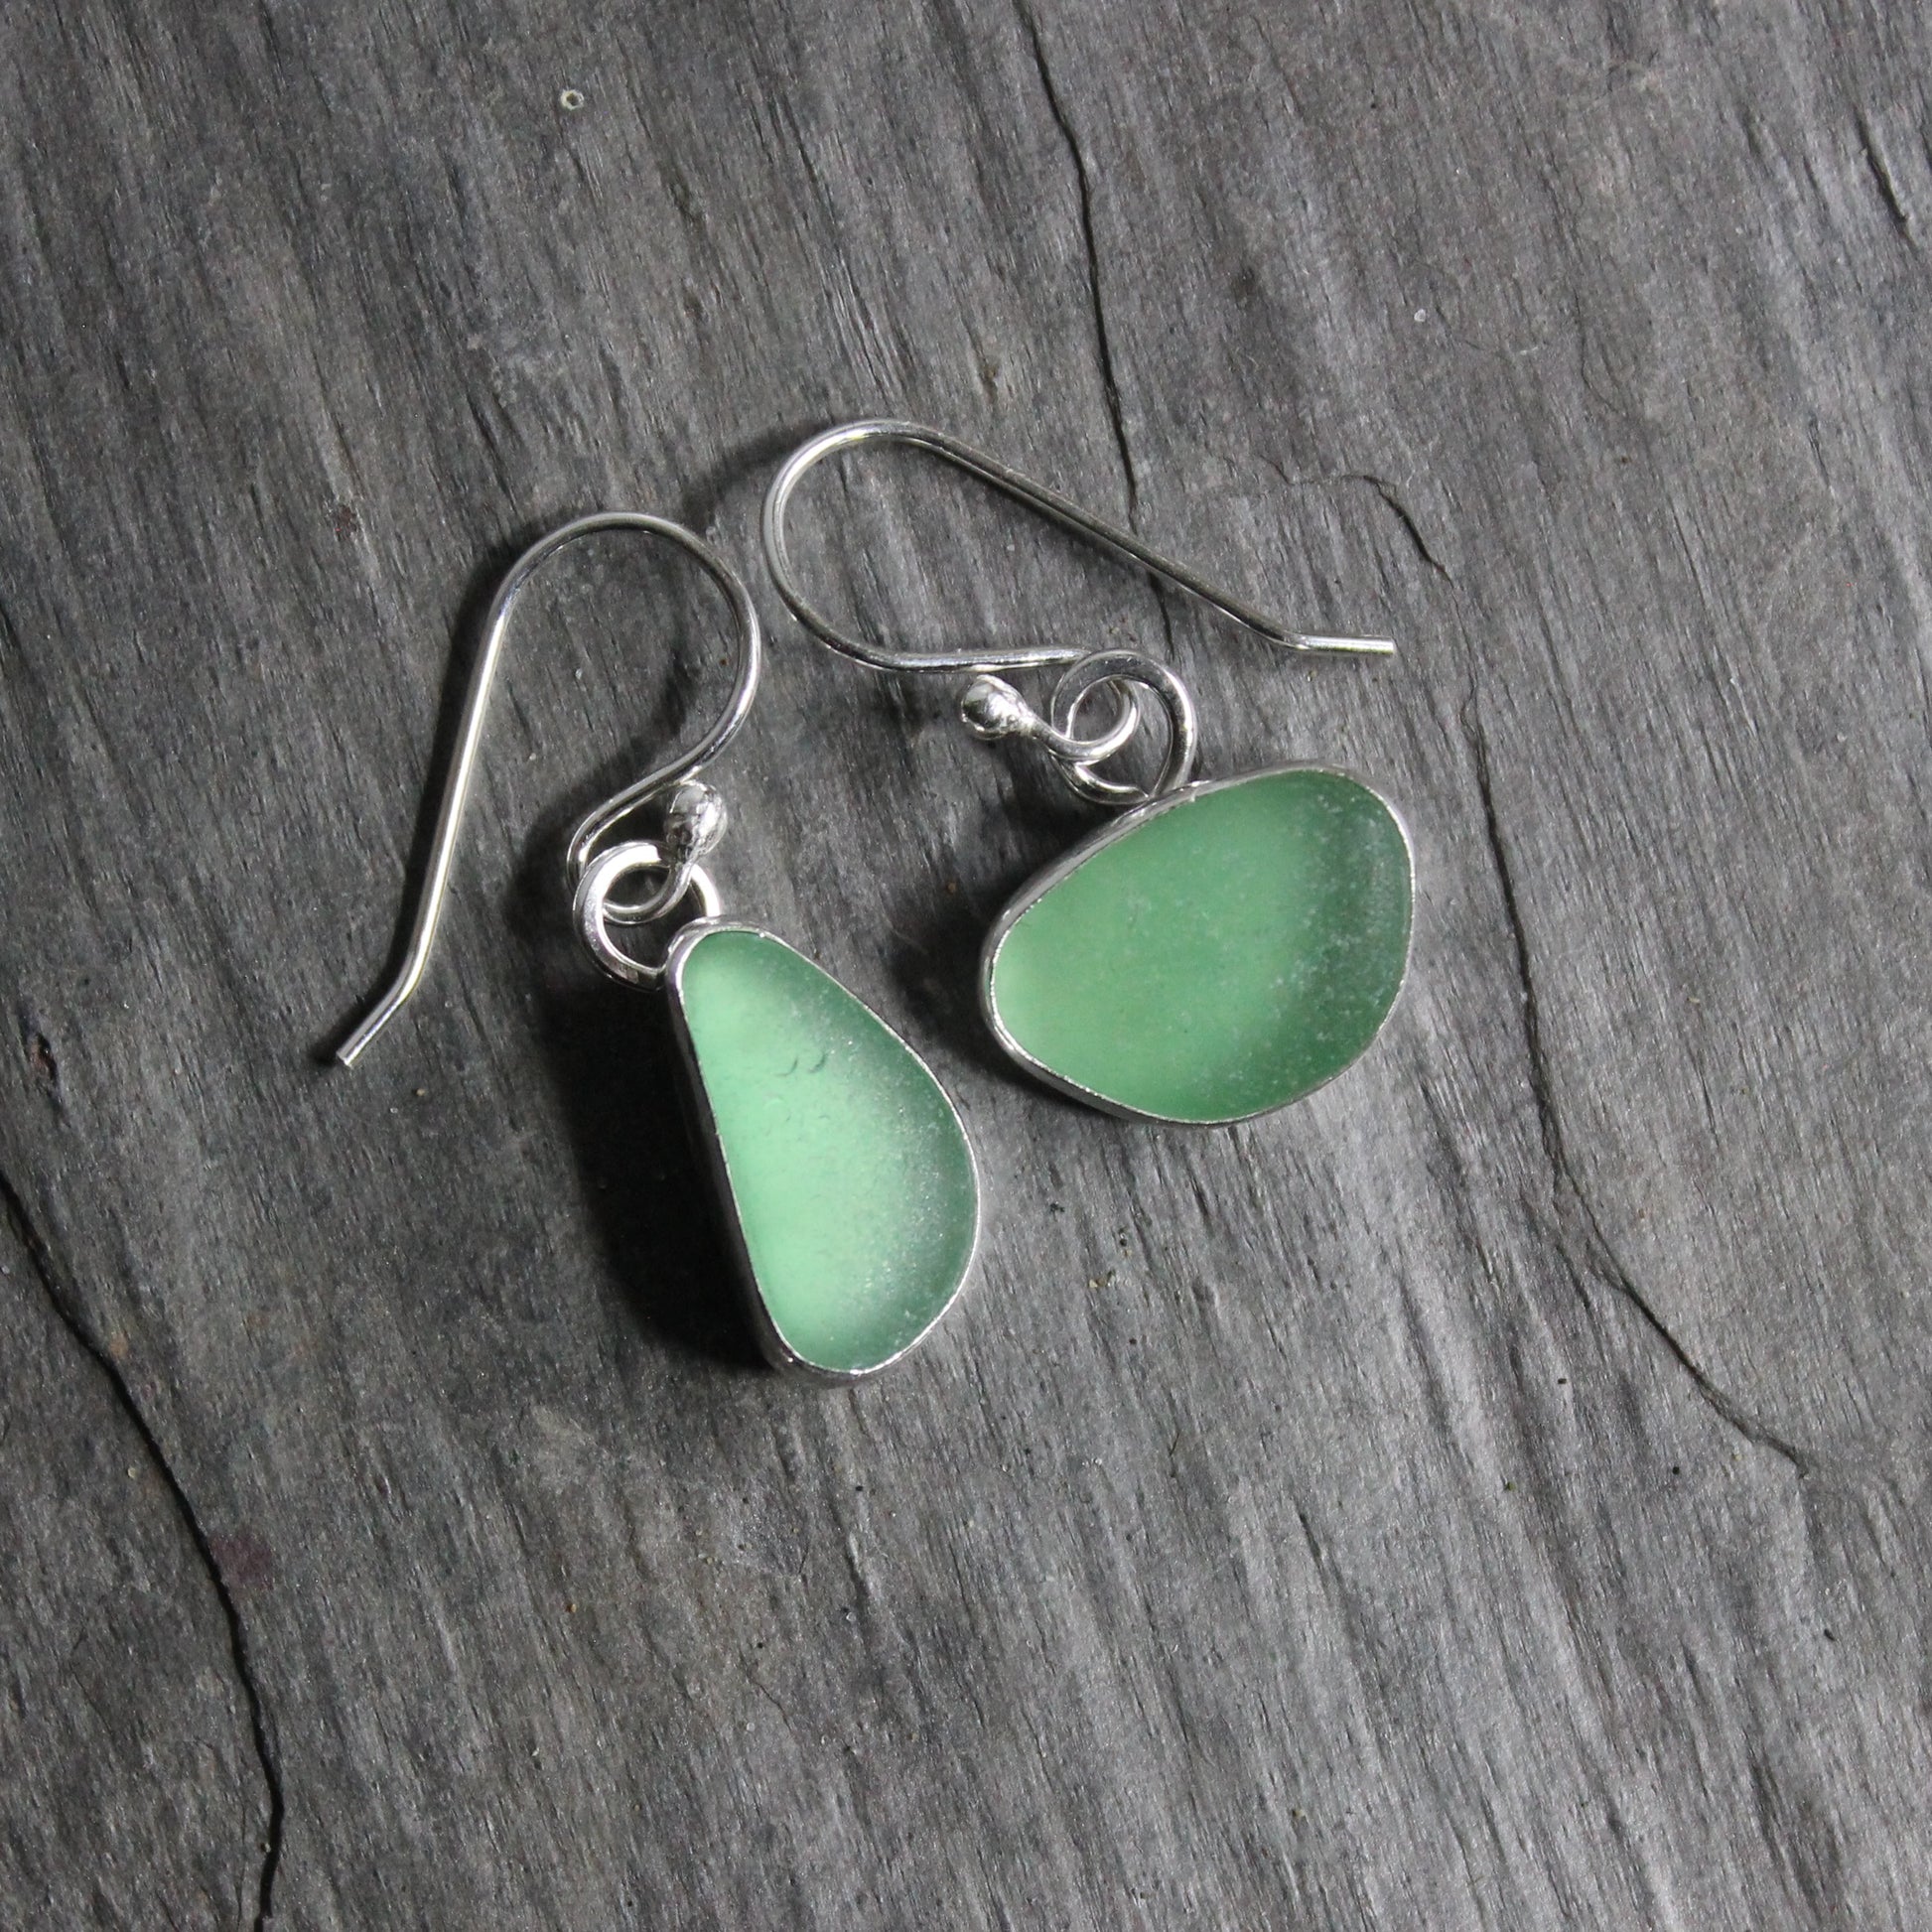 These mismatched dangly sage green earrings are set in a fine & sterling silver bezel setting on handmade ear wires. 